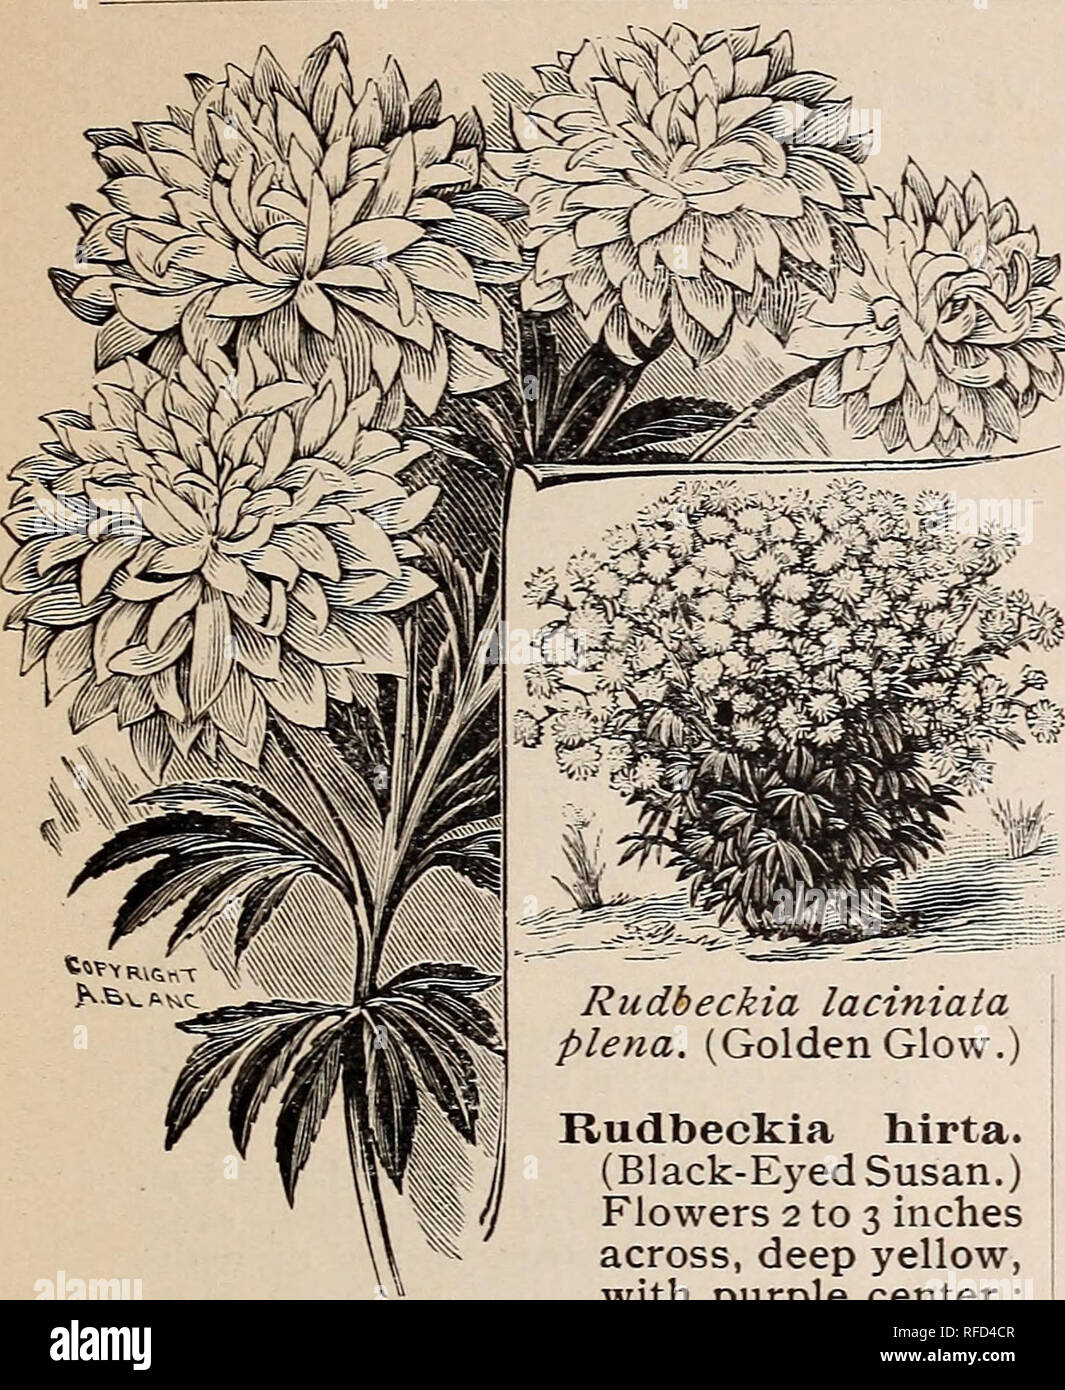 . Retail catalogue of American plants, shrubs and trees. Nursery stock, New Jersey, Hammonton, Catalogs; Plants, Ornamental, Catalogs; Ornamental shrubs, Catalogs; Flowers, Seeds, Catalogs; Trees, Seedlings, Catalogs. Wm. F. Bassett &amp; Son, Hammonton, New Jersey ii. Rudbeckia liirta. (Black-Eyed Susan.) Flowers 2 to 3 inches across, deep yellow, with purple center ; 12 to 18 inches high. 12c. each, 90c. per doz. — laciniata. 3 to 7 feet high, with light yellow flowers 2 inches across ; foliage cut and divided irregularly. 15 cts. each, $1 per doz. plena (Golden Glow). This proves to be one  Stock Photo